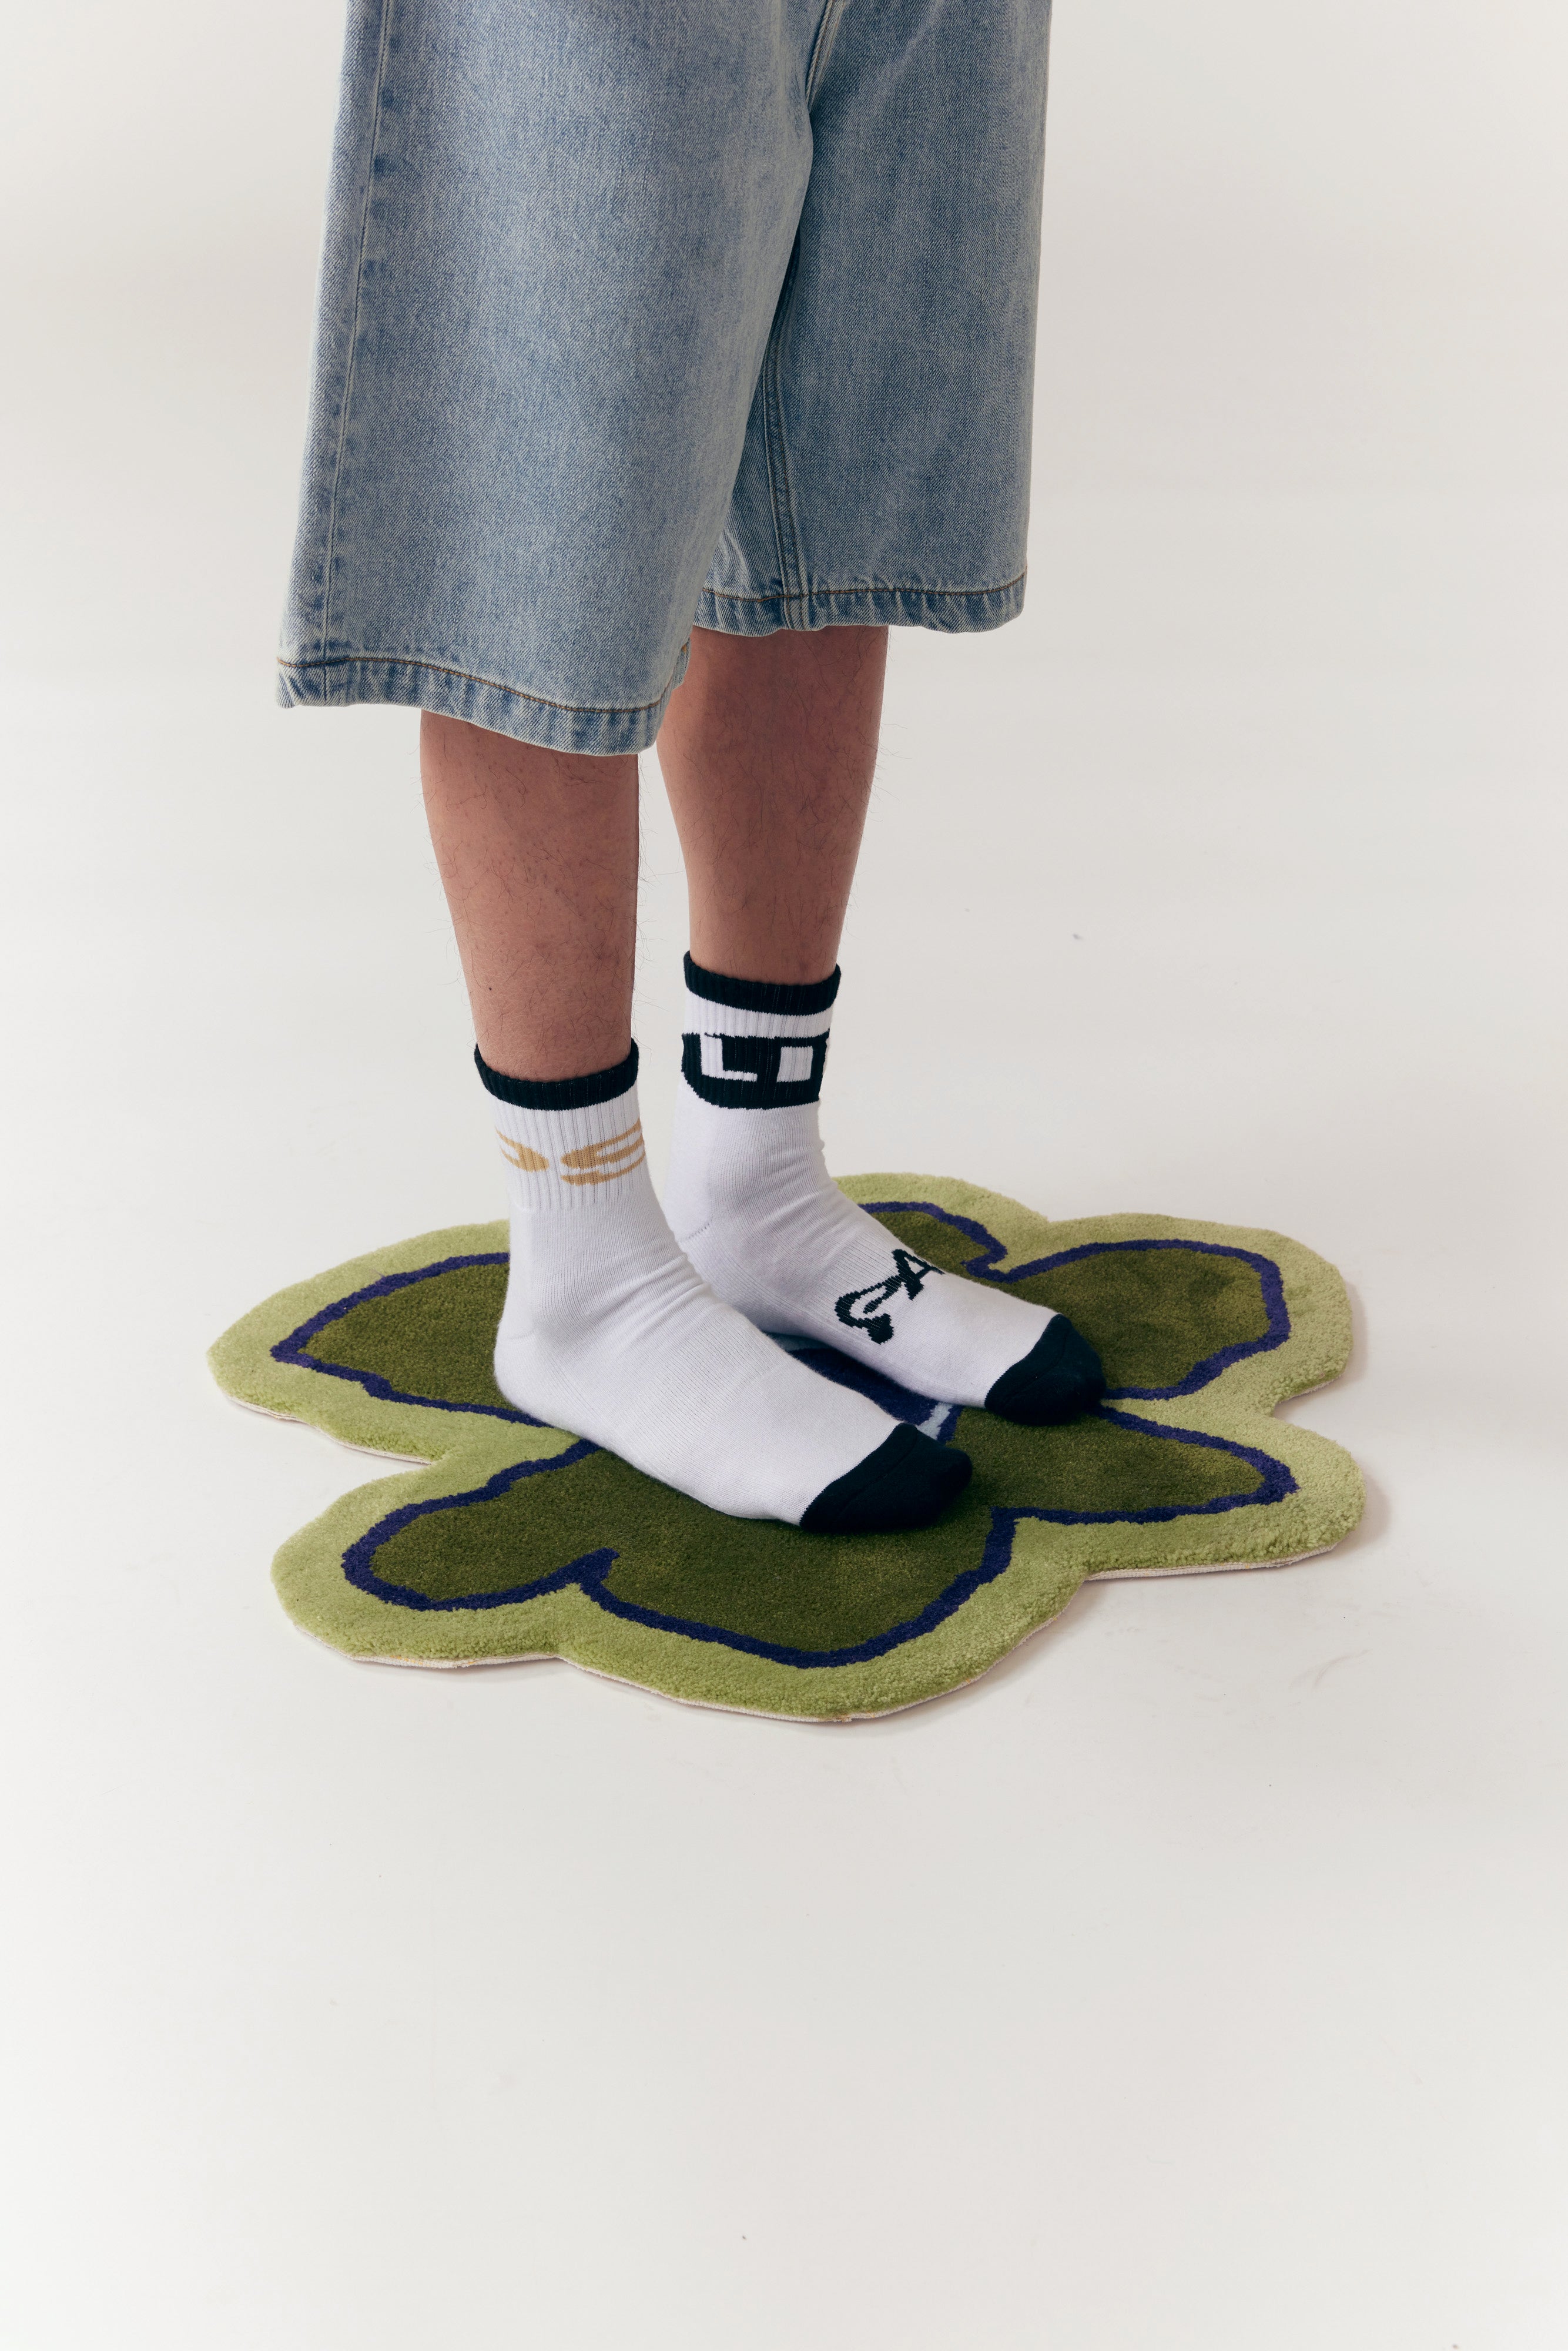 The PSY LIFE SHORT SPORT SOCKS  available online with global shipping, and in PAM Stores Melbourne and Sydney.